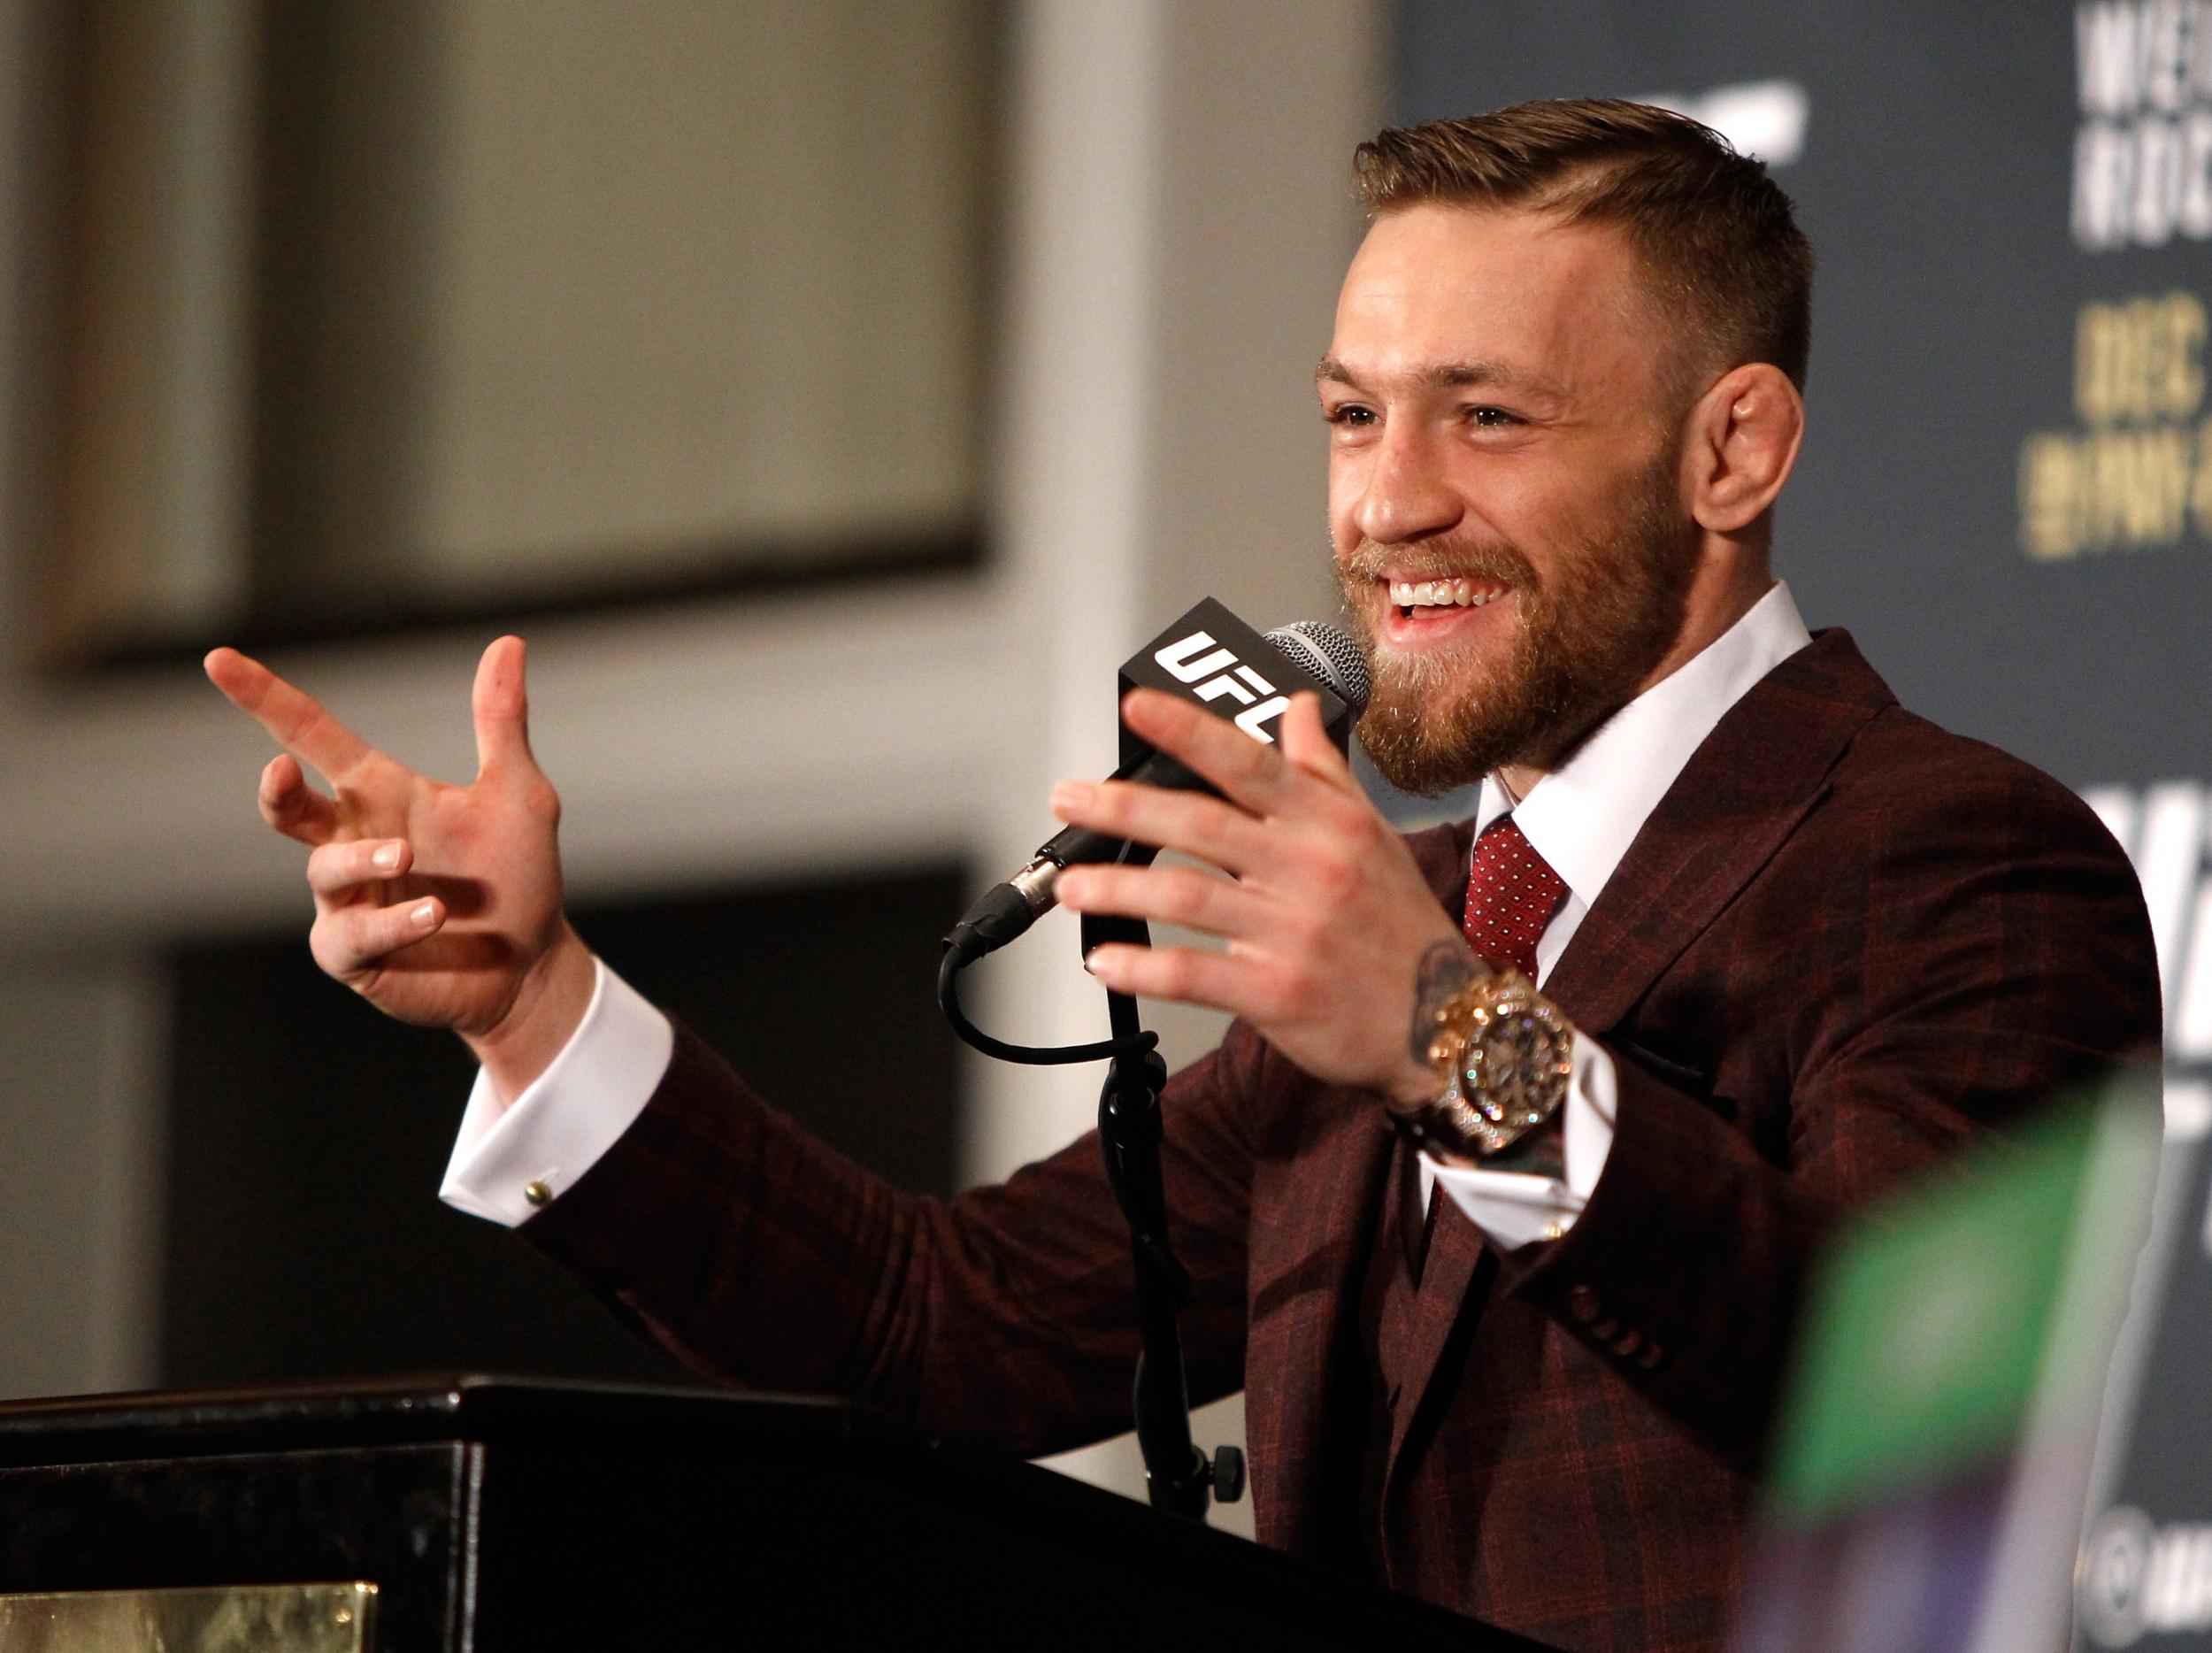 McGregor has set his sights on breaking into fresh territory